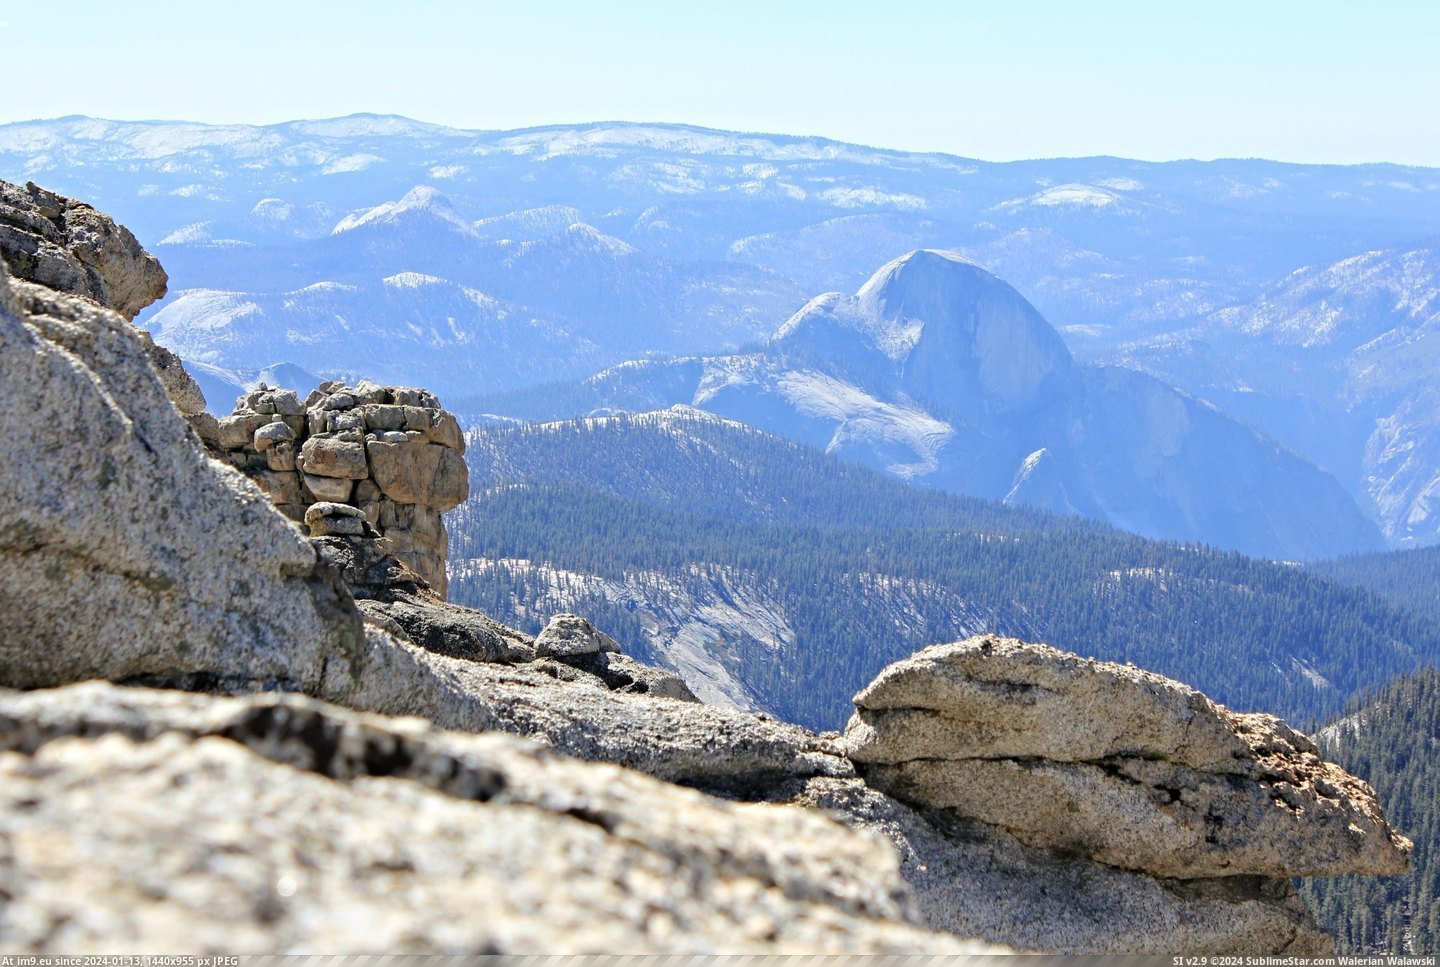 #Feet #Yosemite #Dome #Degree #Providing #Mount #Panoramic [Earthporn] 2,000 feet above Half Dome is towering Mount Hoffman, providing a 360 degree panoramic view of Yosemite and the Sier Pic. (Obraz z album My r/EARTHPORN favs))